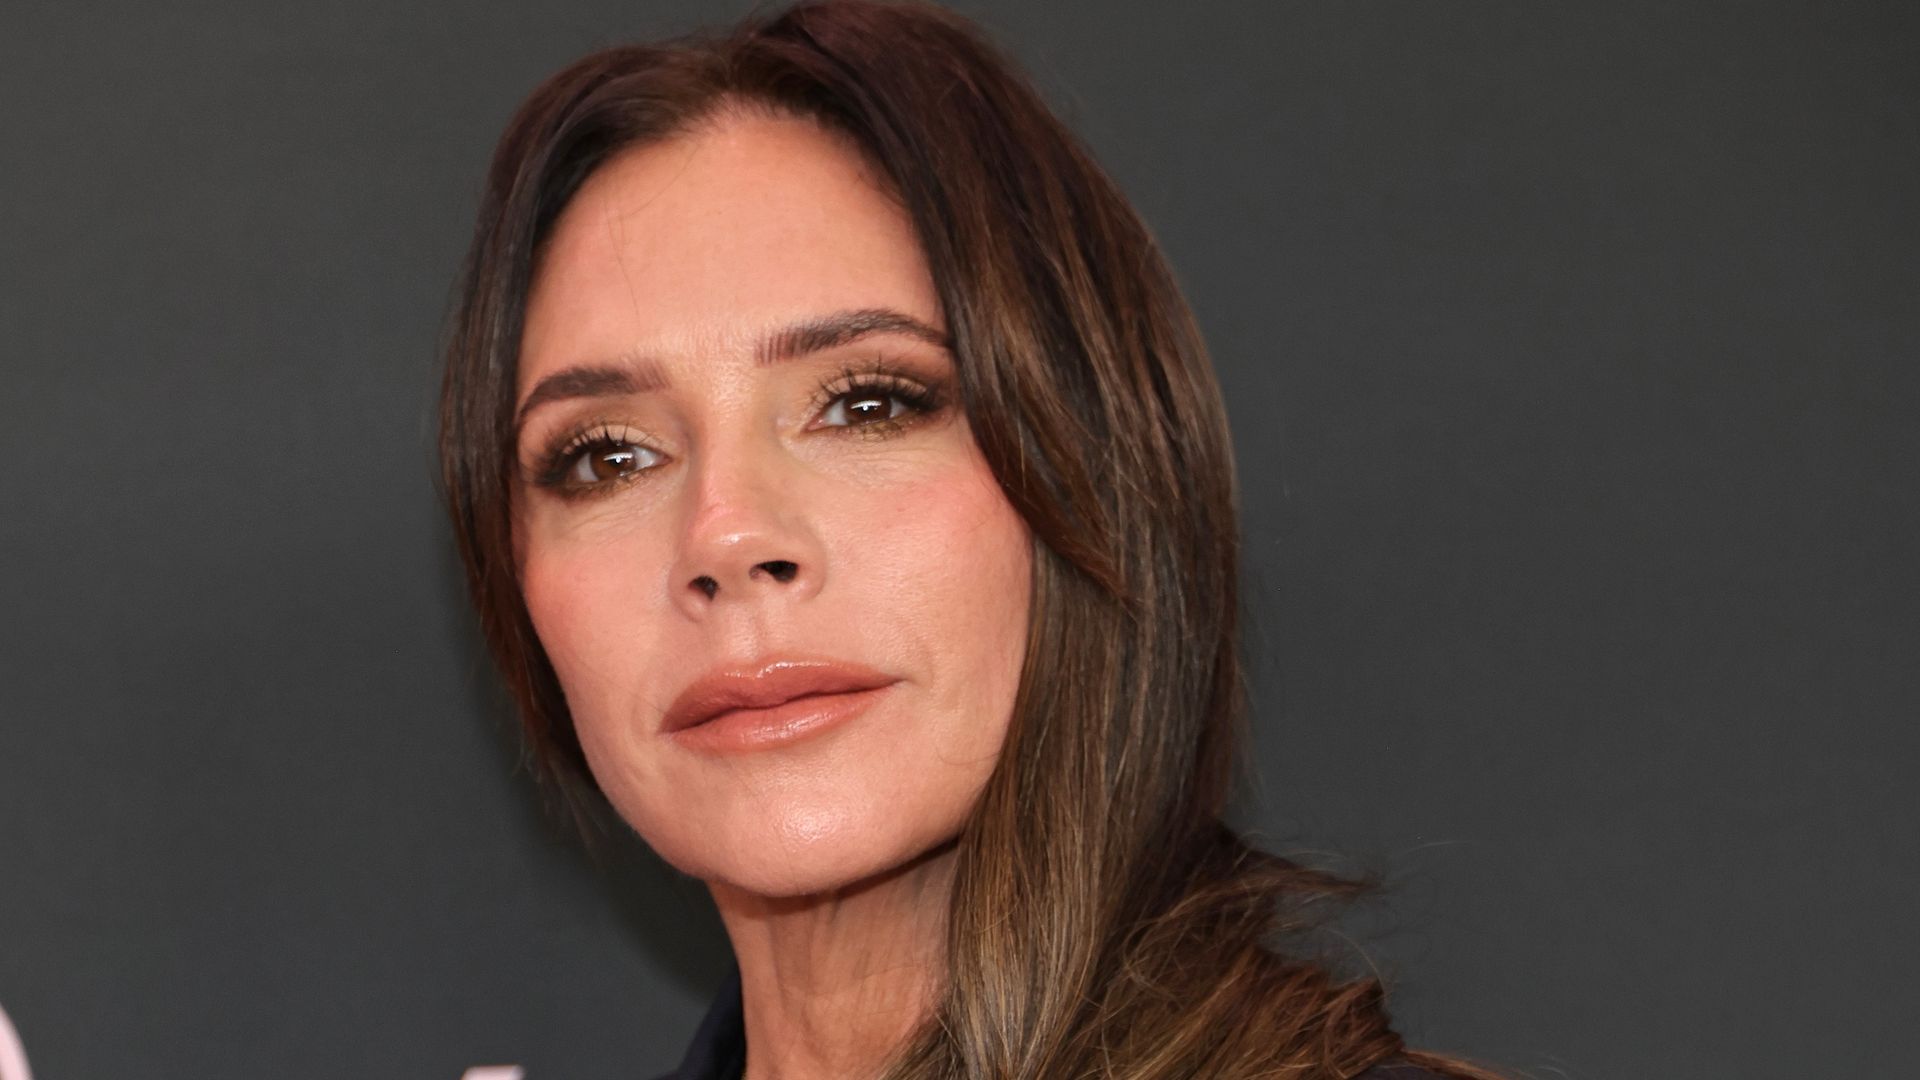 Victoria Beckham's sheer mint green birthday dress is a thing of dreams